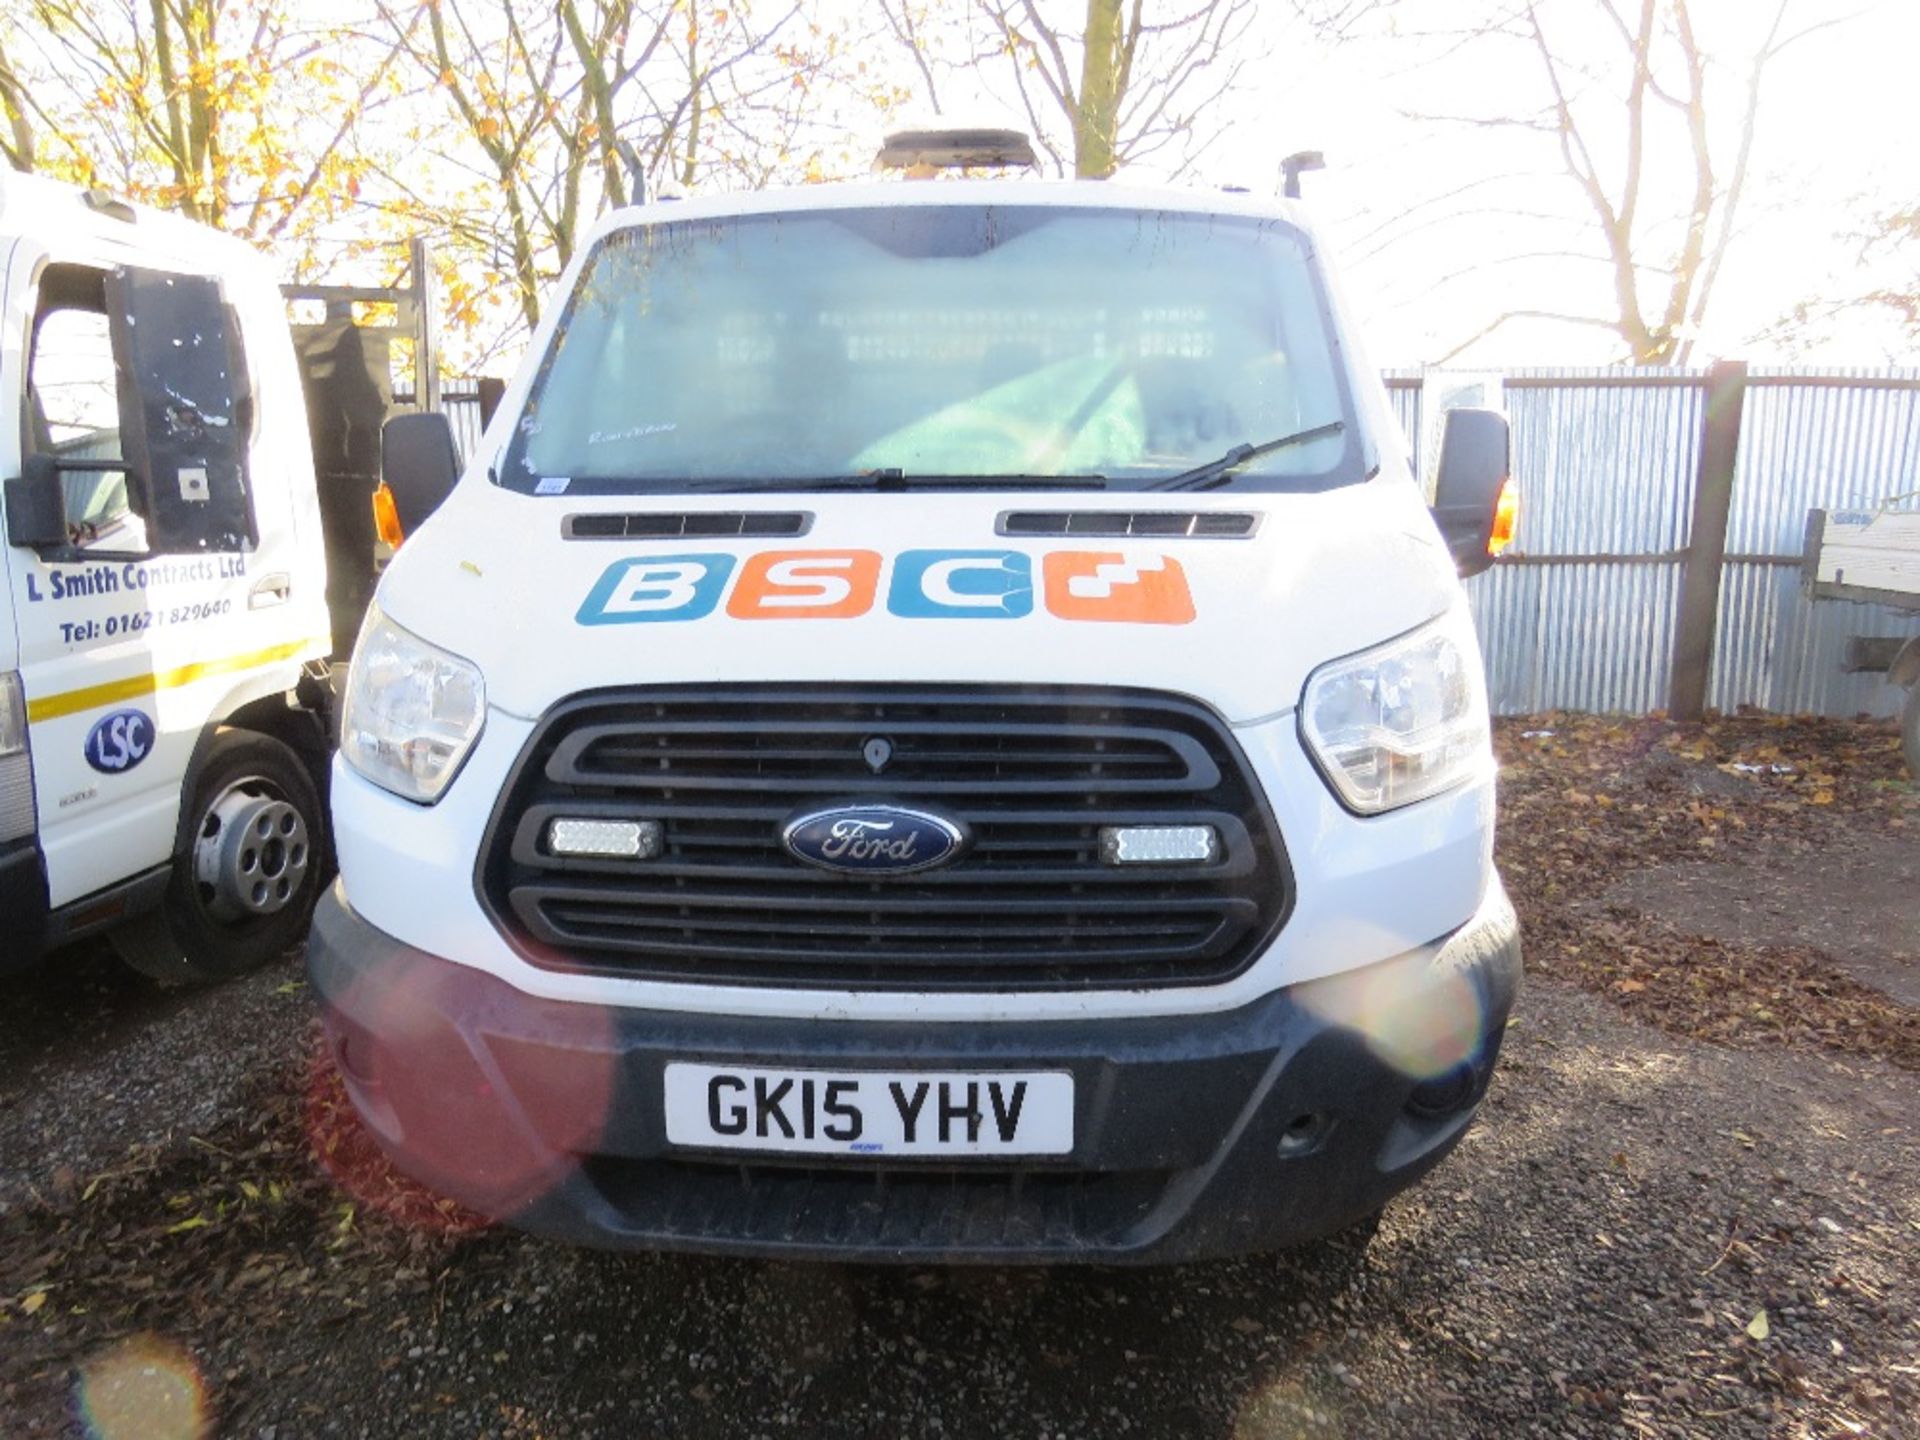 FORD TRANSIT 350 TWIN WHEEL 3.5TONNE DROP SIDE TRUCK WITH REAR TAIL LIFT REG:GK15 YHV. 216,966 REC M - Image 3 of 10